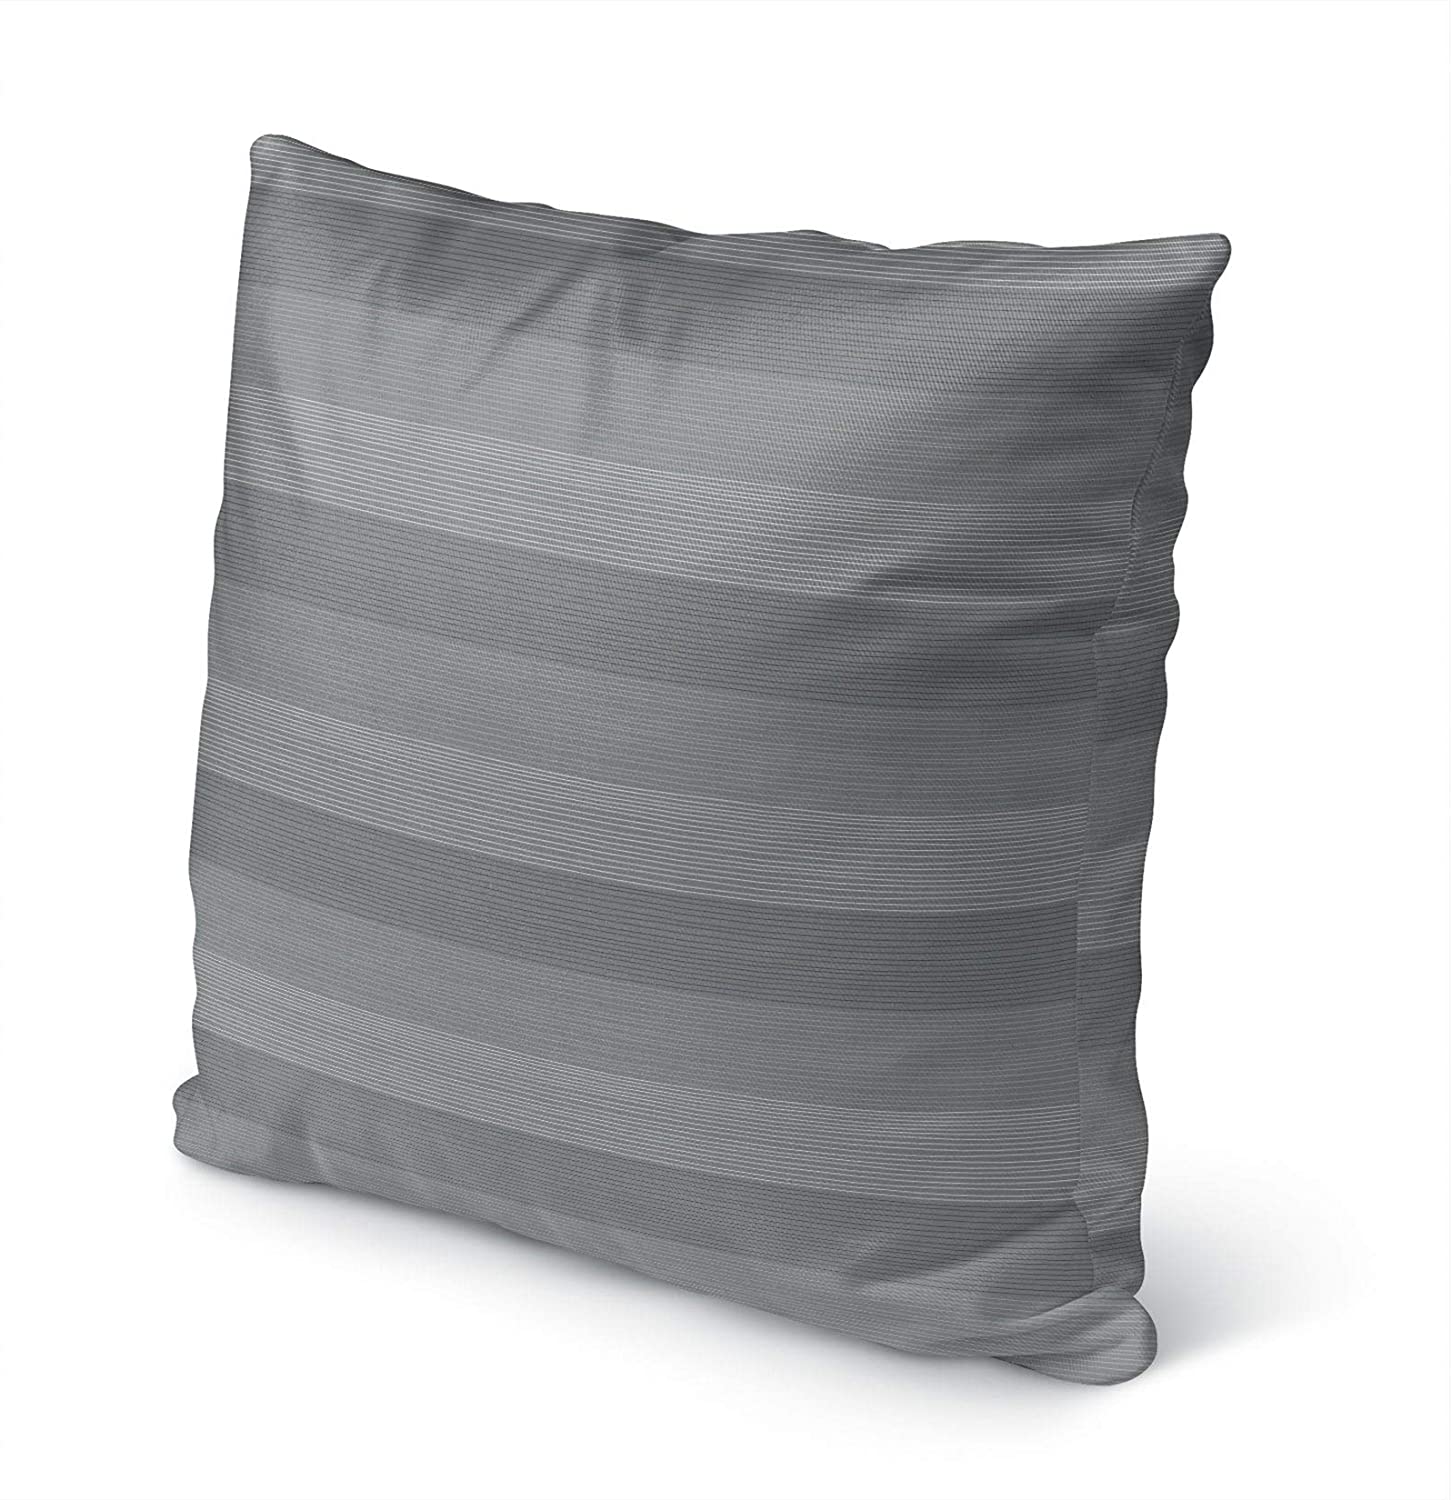 Sleek Grey Indoor|Outdoor Pillow by Tiffany 18x18 Grey Geometric Modern Contemporary Polyester Removable Cover